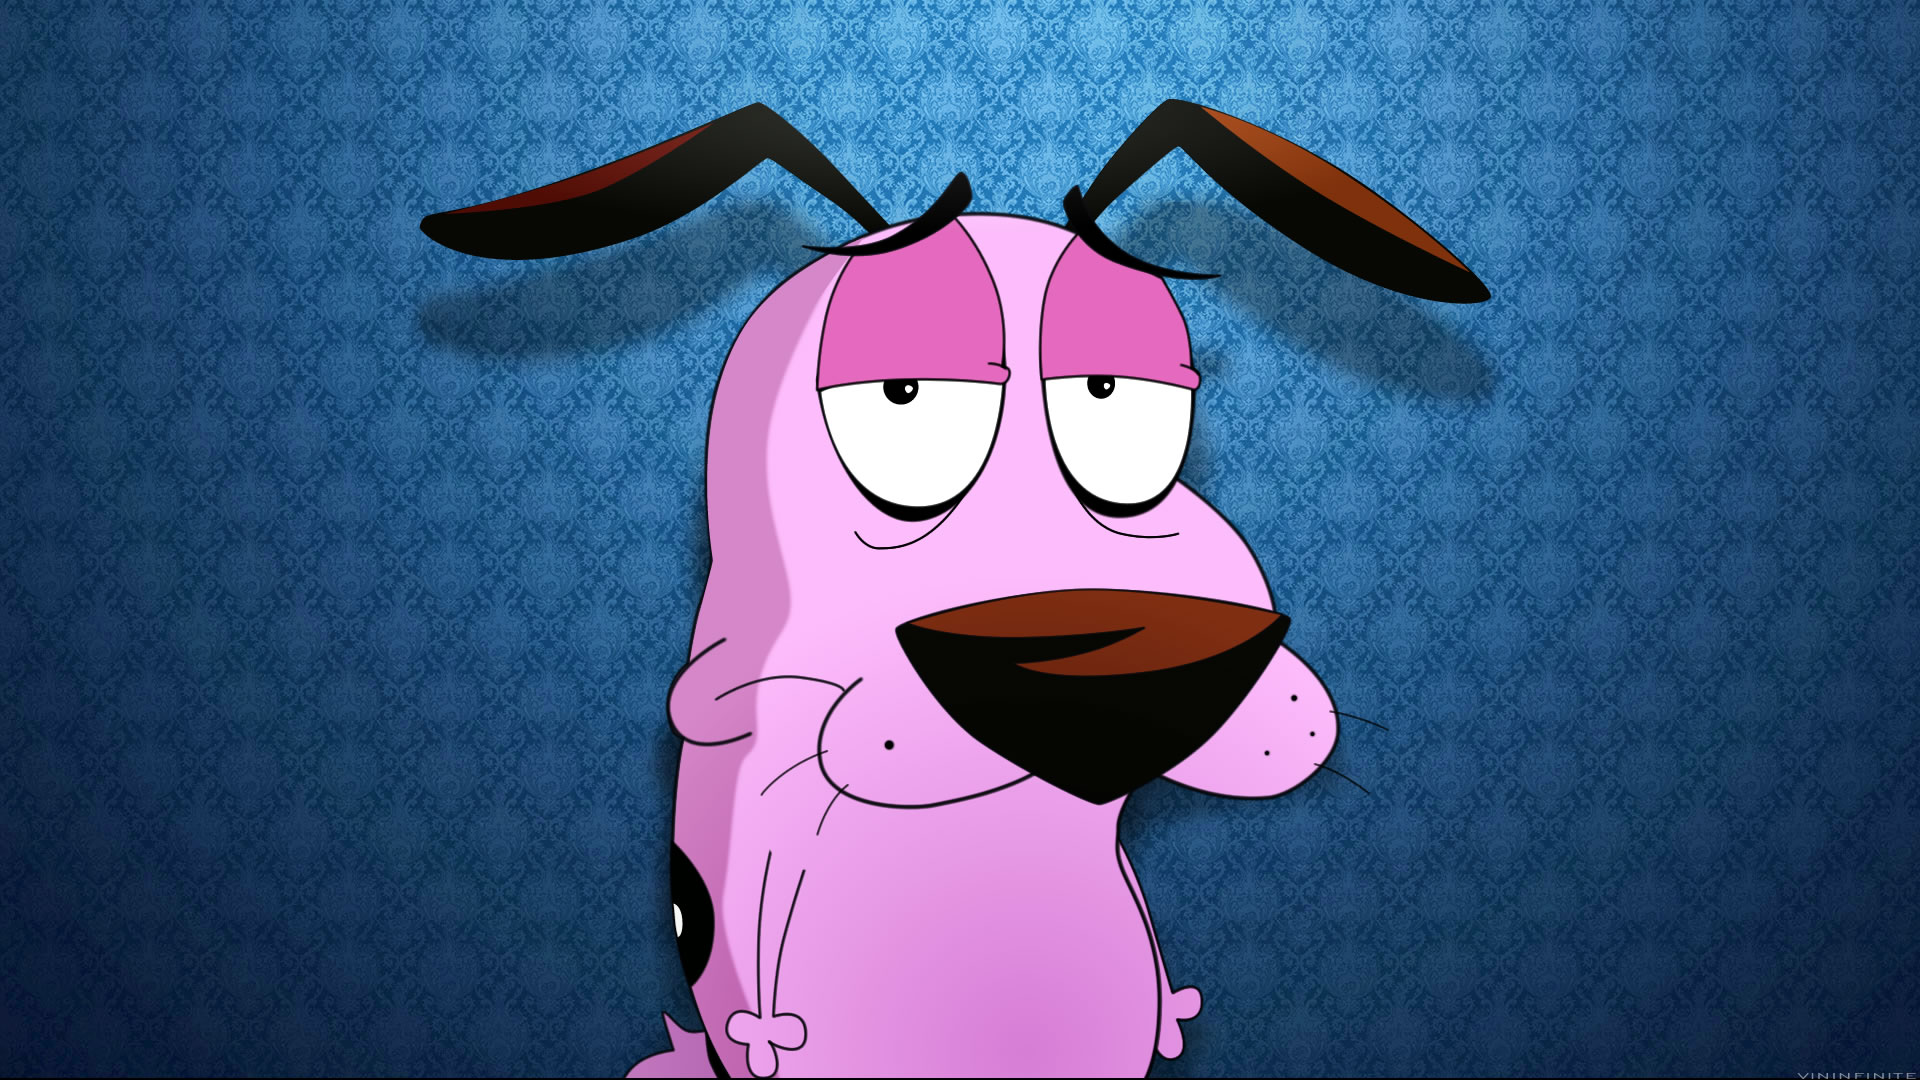 "Courage the Cowardly Dog" has no monsters in it. Ever wondered why your dog barks at a bush? Maybe it sees that bush as a monster? This theory says that what we see is the way dogs view the world- there are no monsters, they don't live in the middle of nowhere, the dog's owners are too old to take him for long runs so he doesn't know what his neighborhood looks like and imagines the worst.